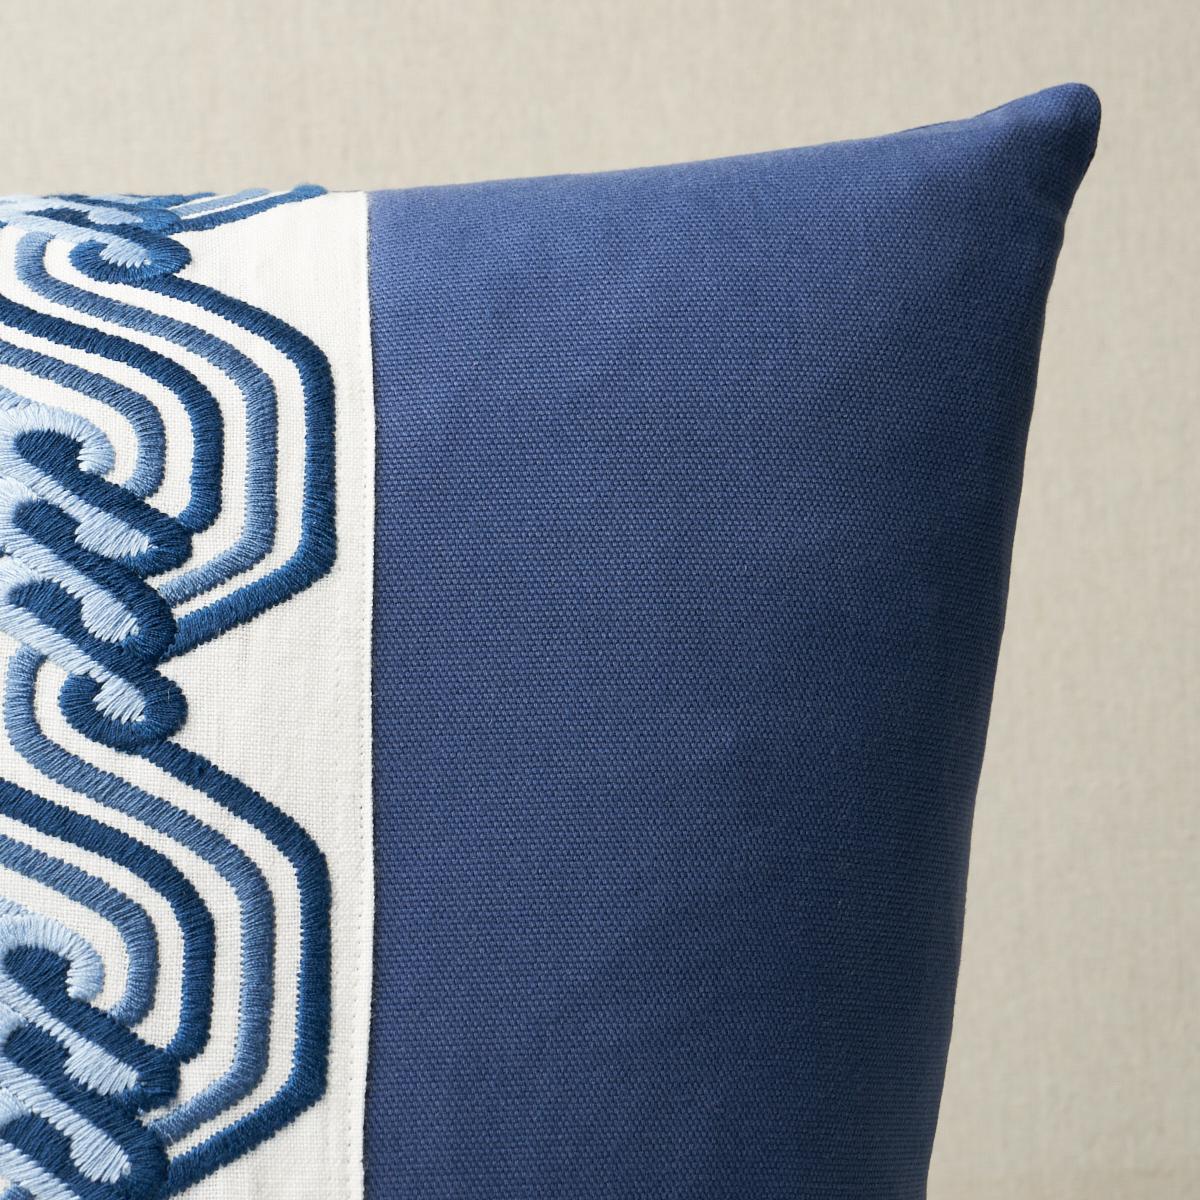 The Twist Embroidered Pillow 18